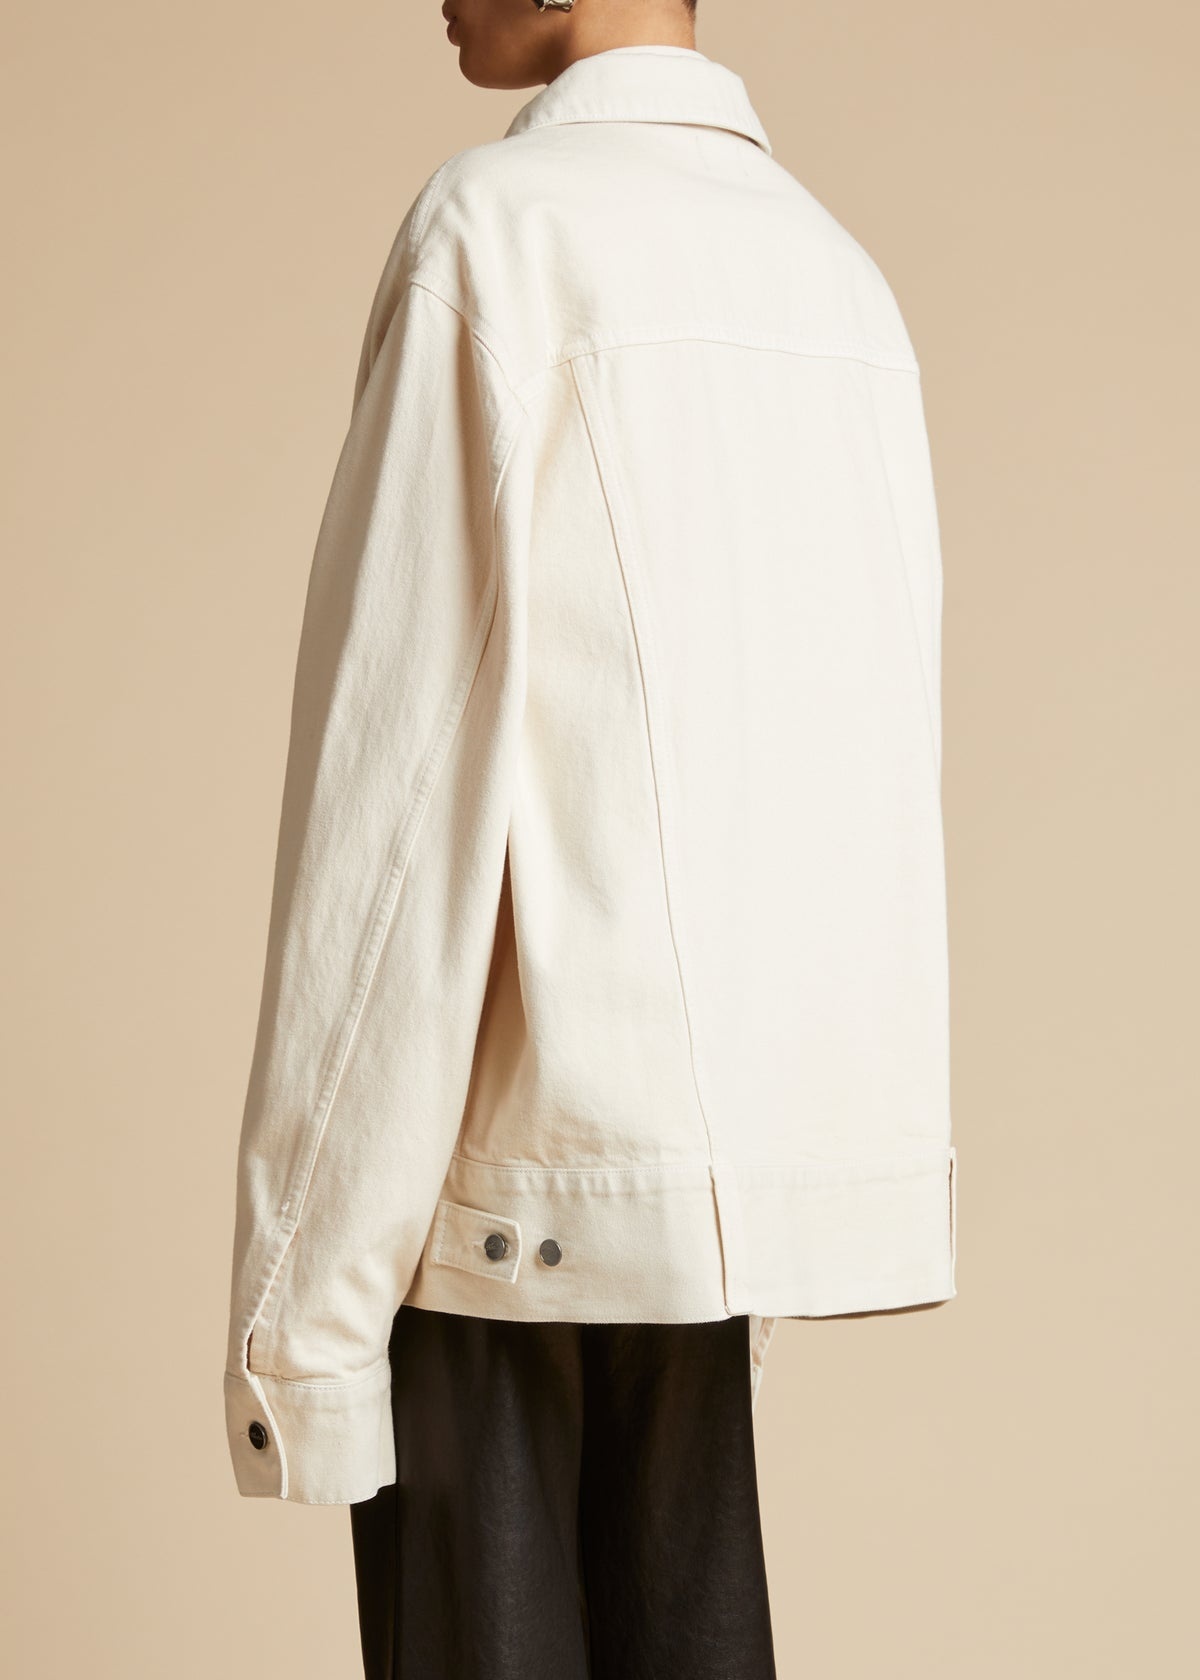 The Grizzo Jacket in Ivory - 3